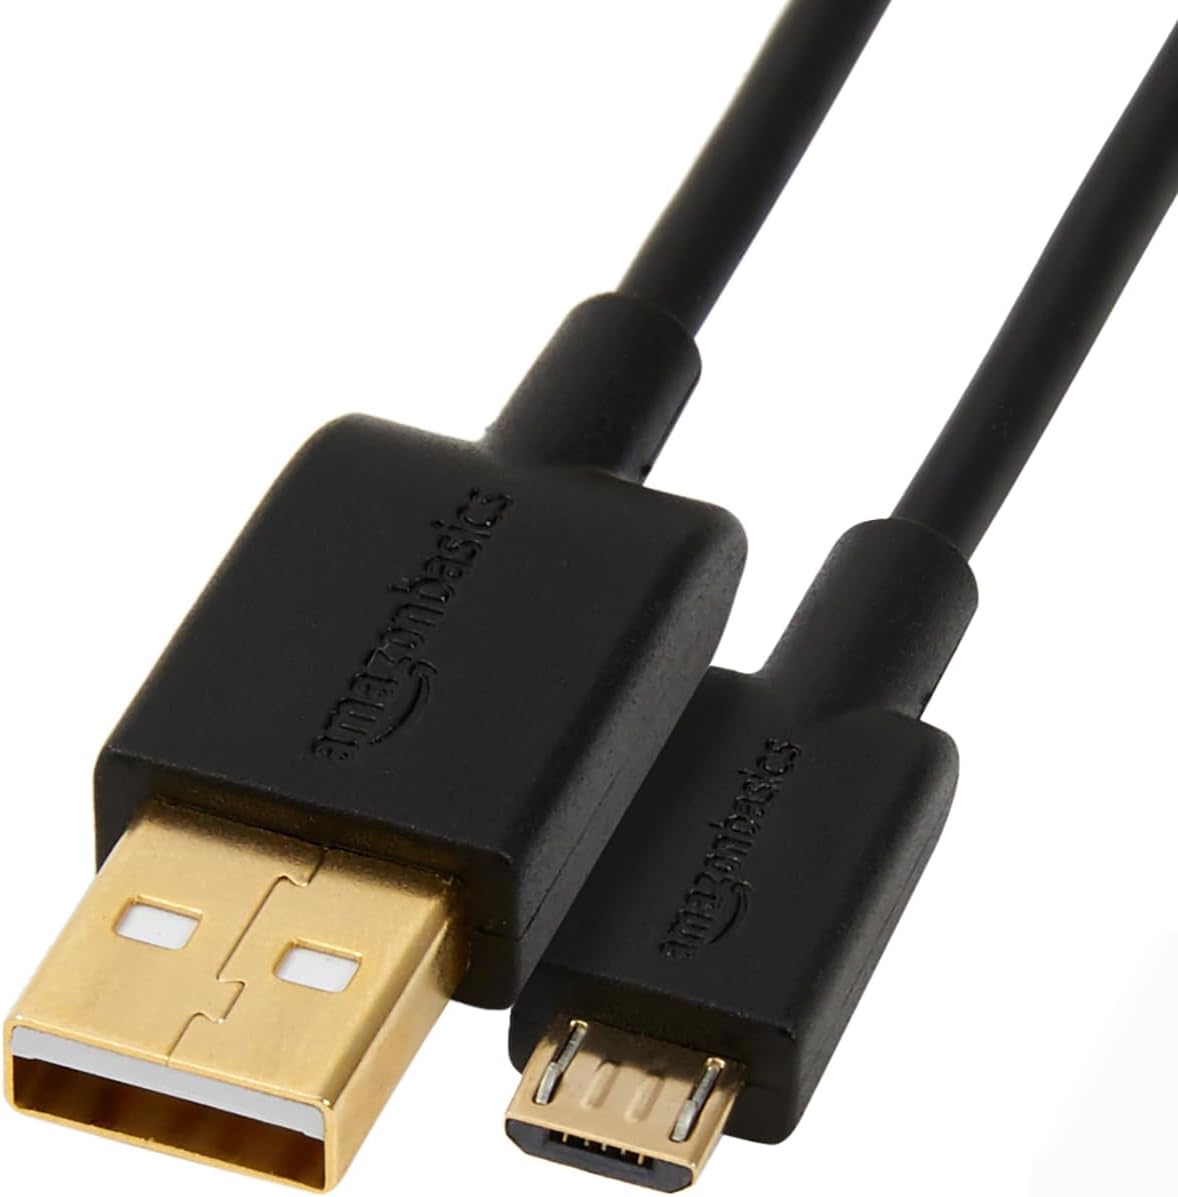 UGAME Basics USB-A to Micro USB Fast Charging Cable, 480Mbps Transfer Speed with Gold-Plated Plugs, USB 2.0, , Black